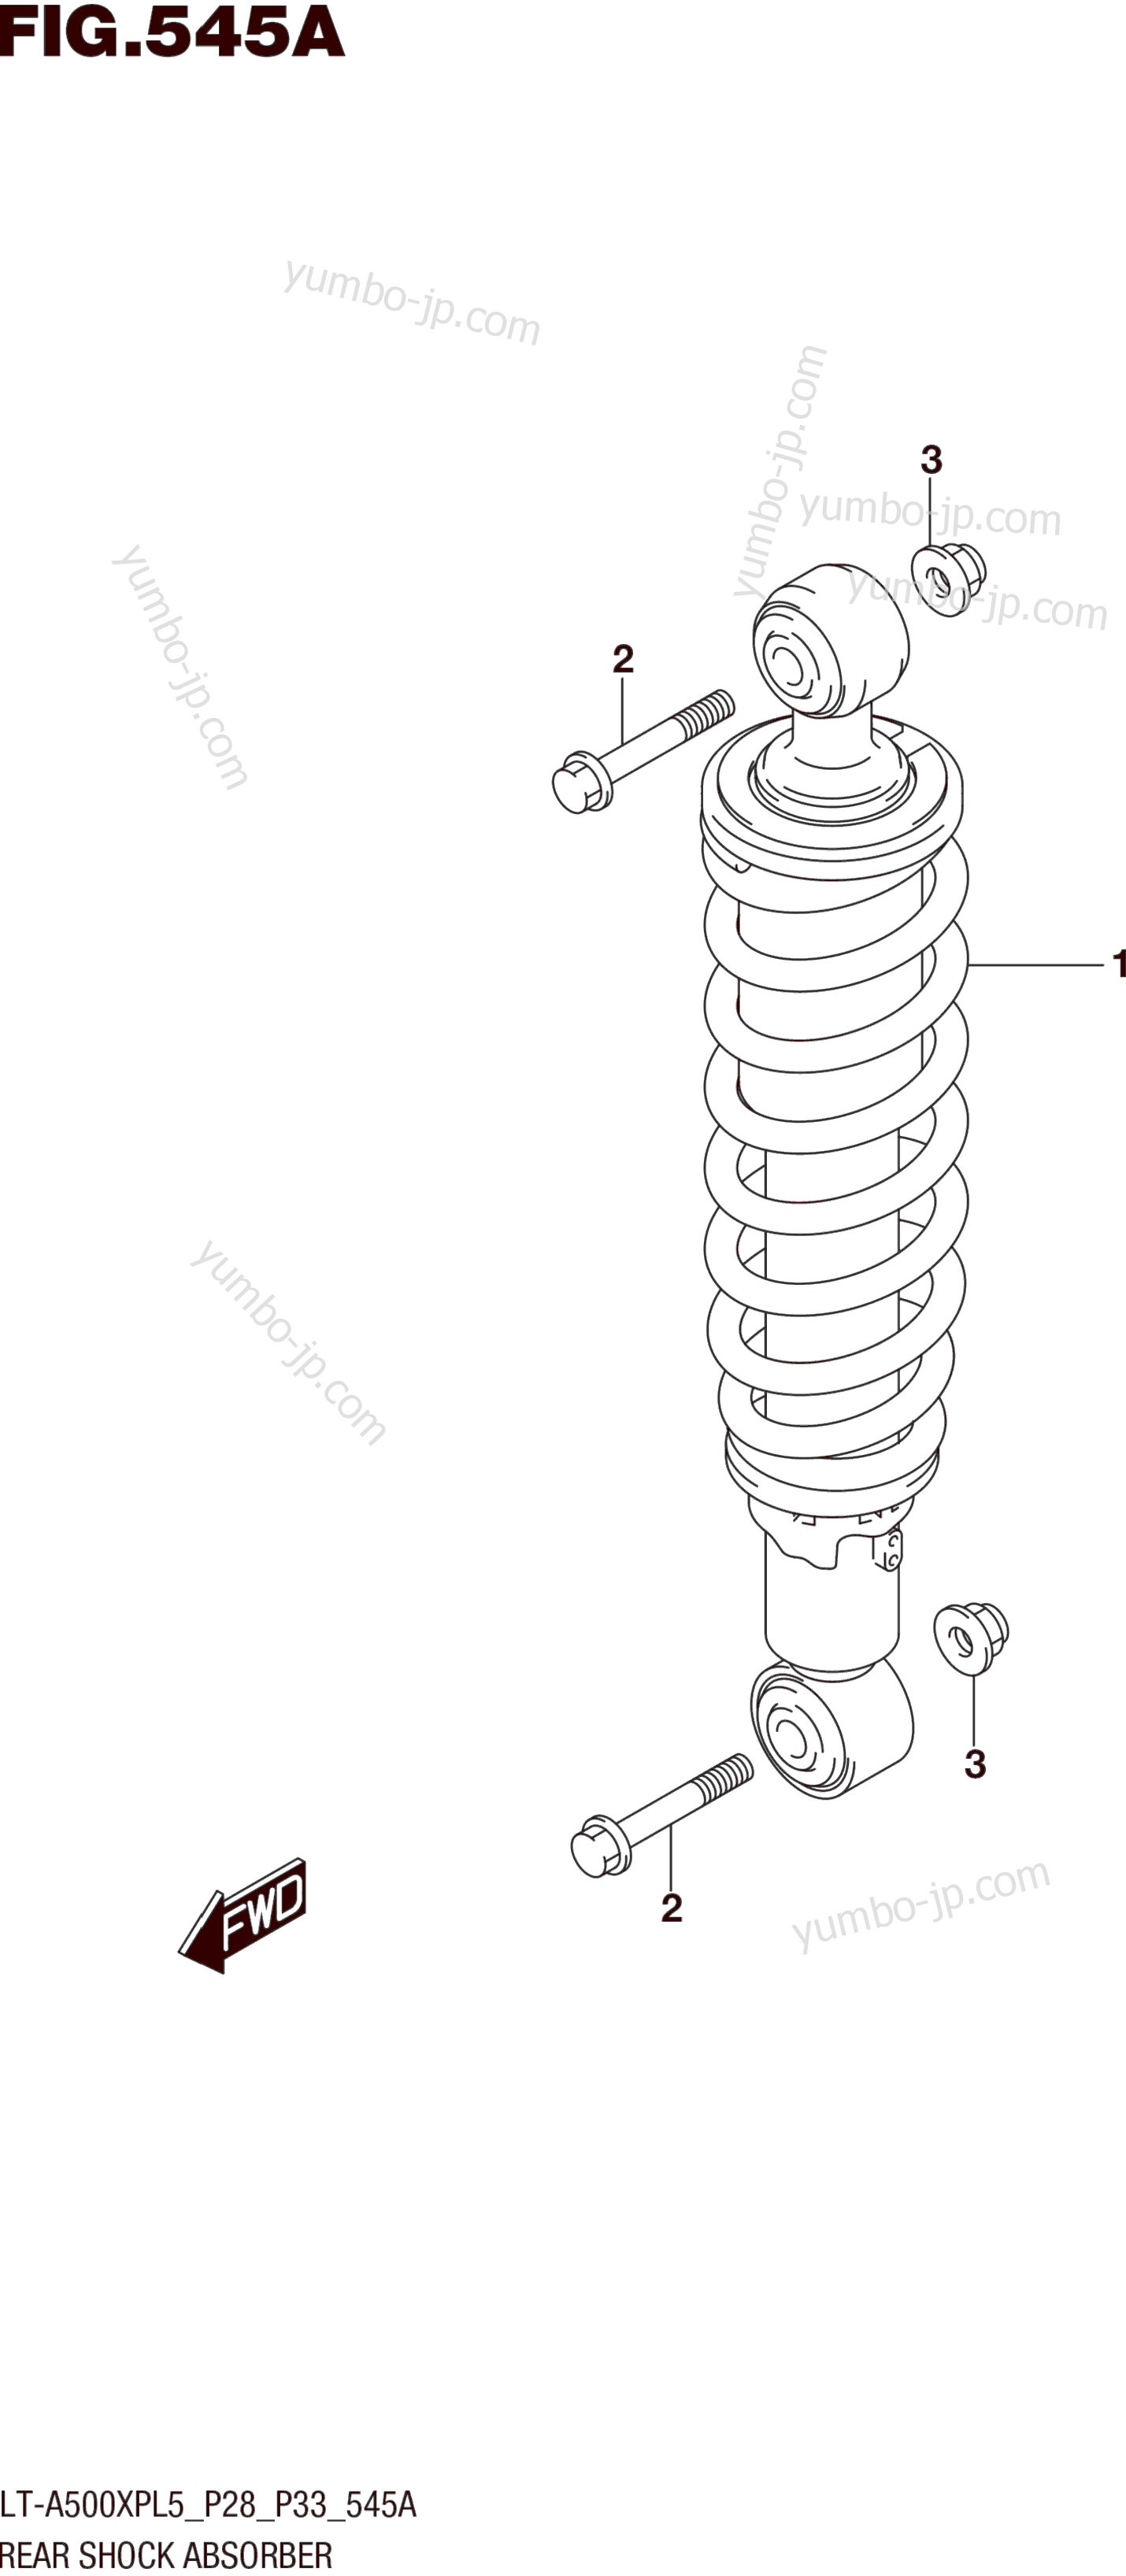 REAR SHOCK ABSORBER for ATVs SUZUKI LT-A500XP 2015 year